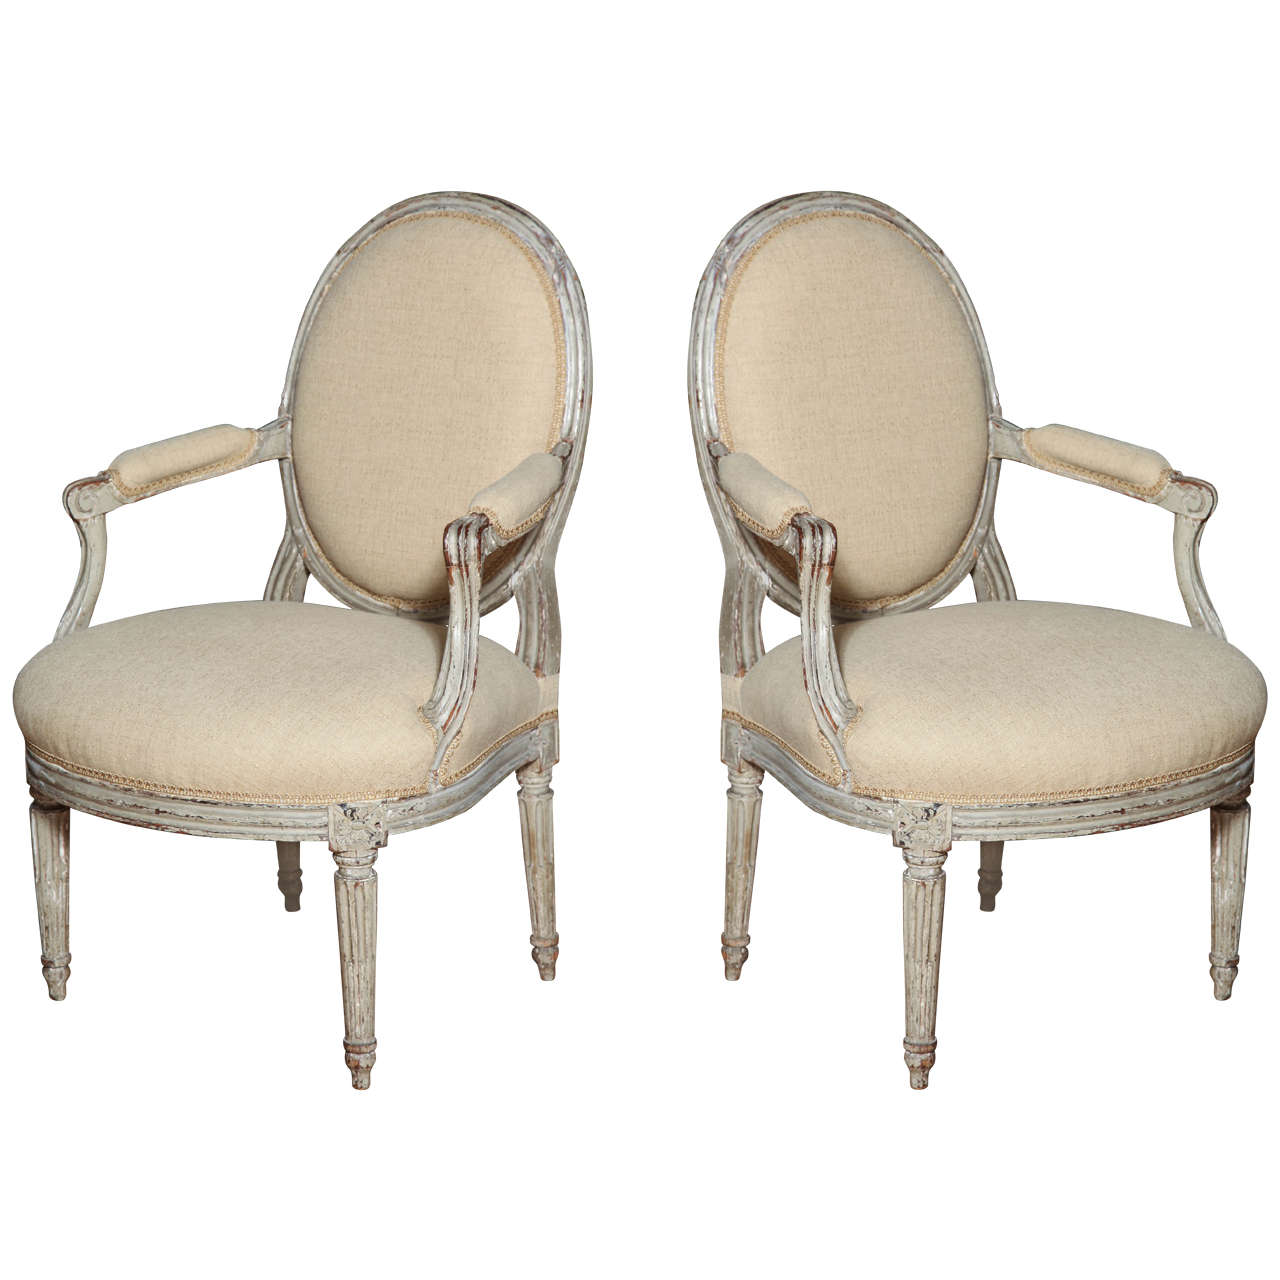 A Pair of Louis XVI Carved and Painted Beechwood Fauteuils A La Reine